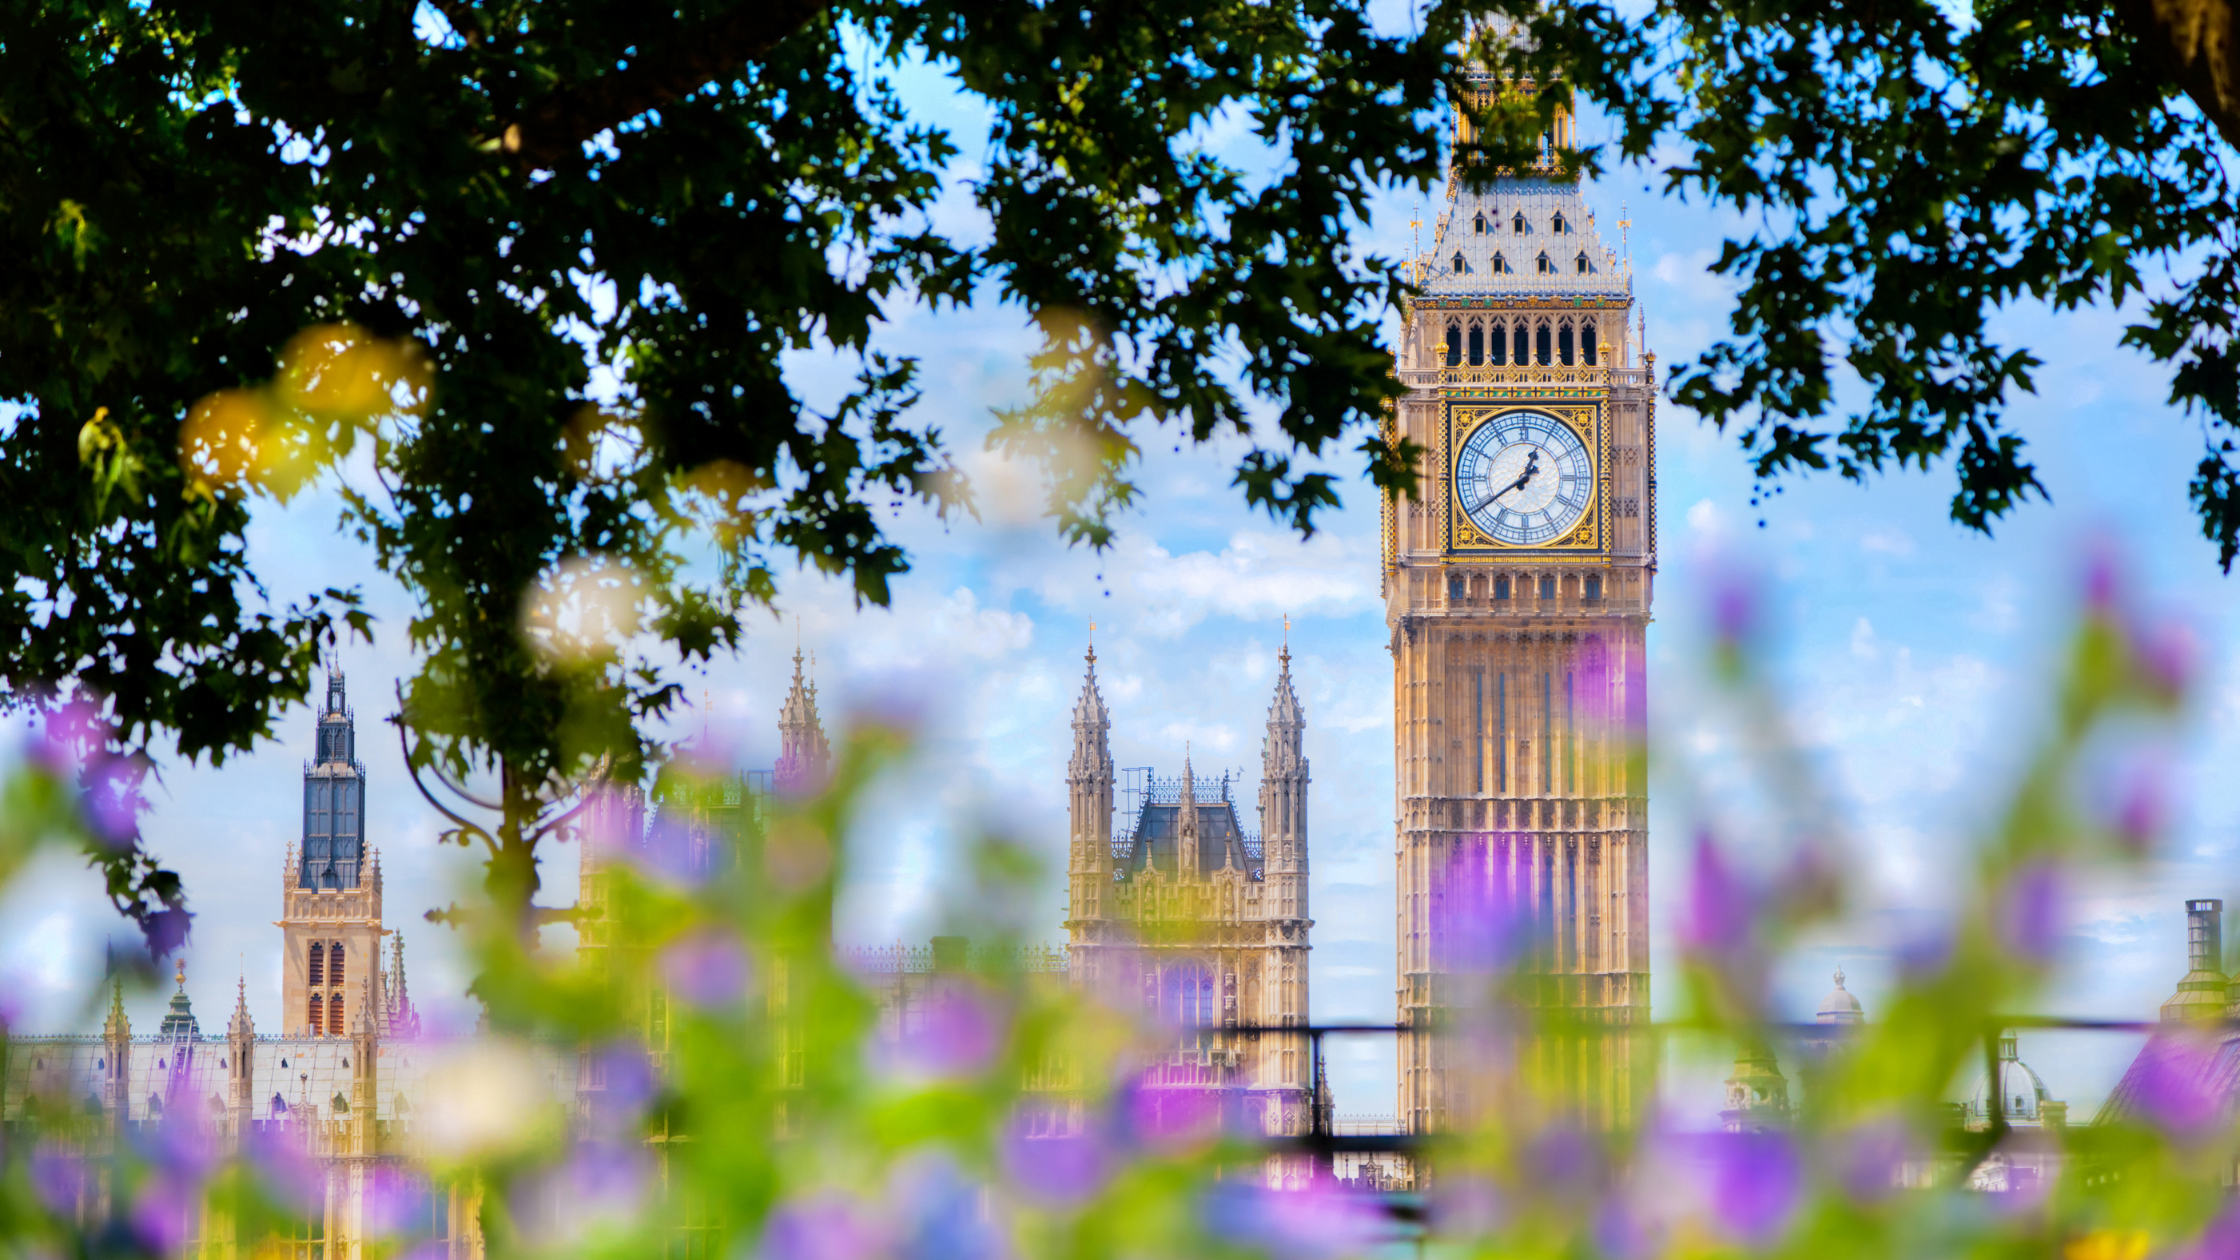 View of the Palace of Westminster and Big Ben framed by trees and flowers